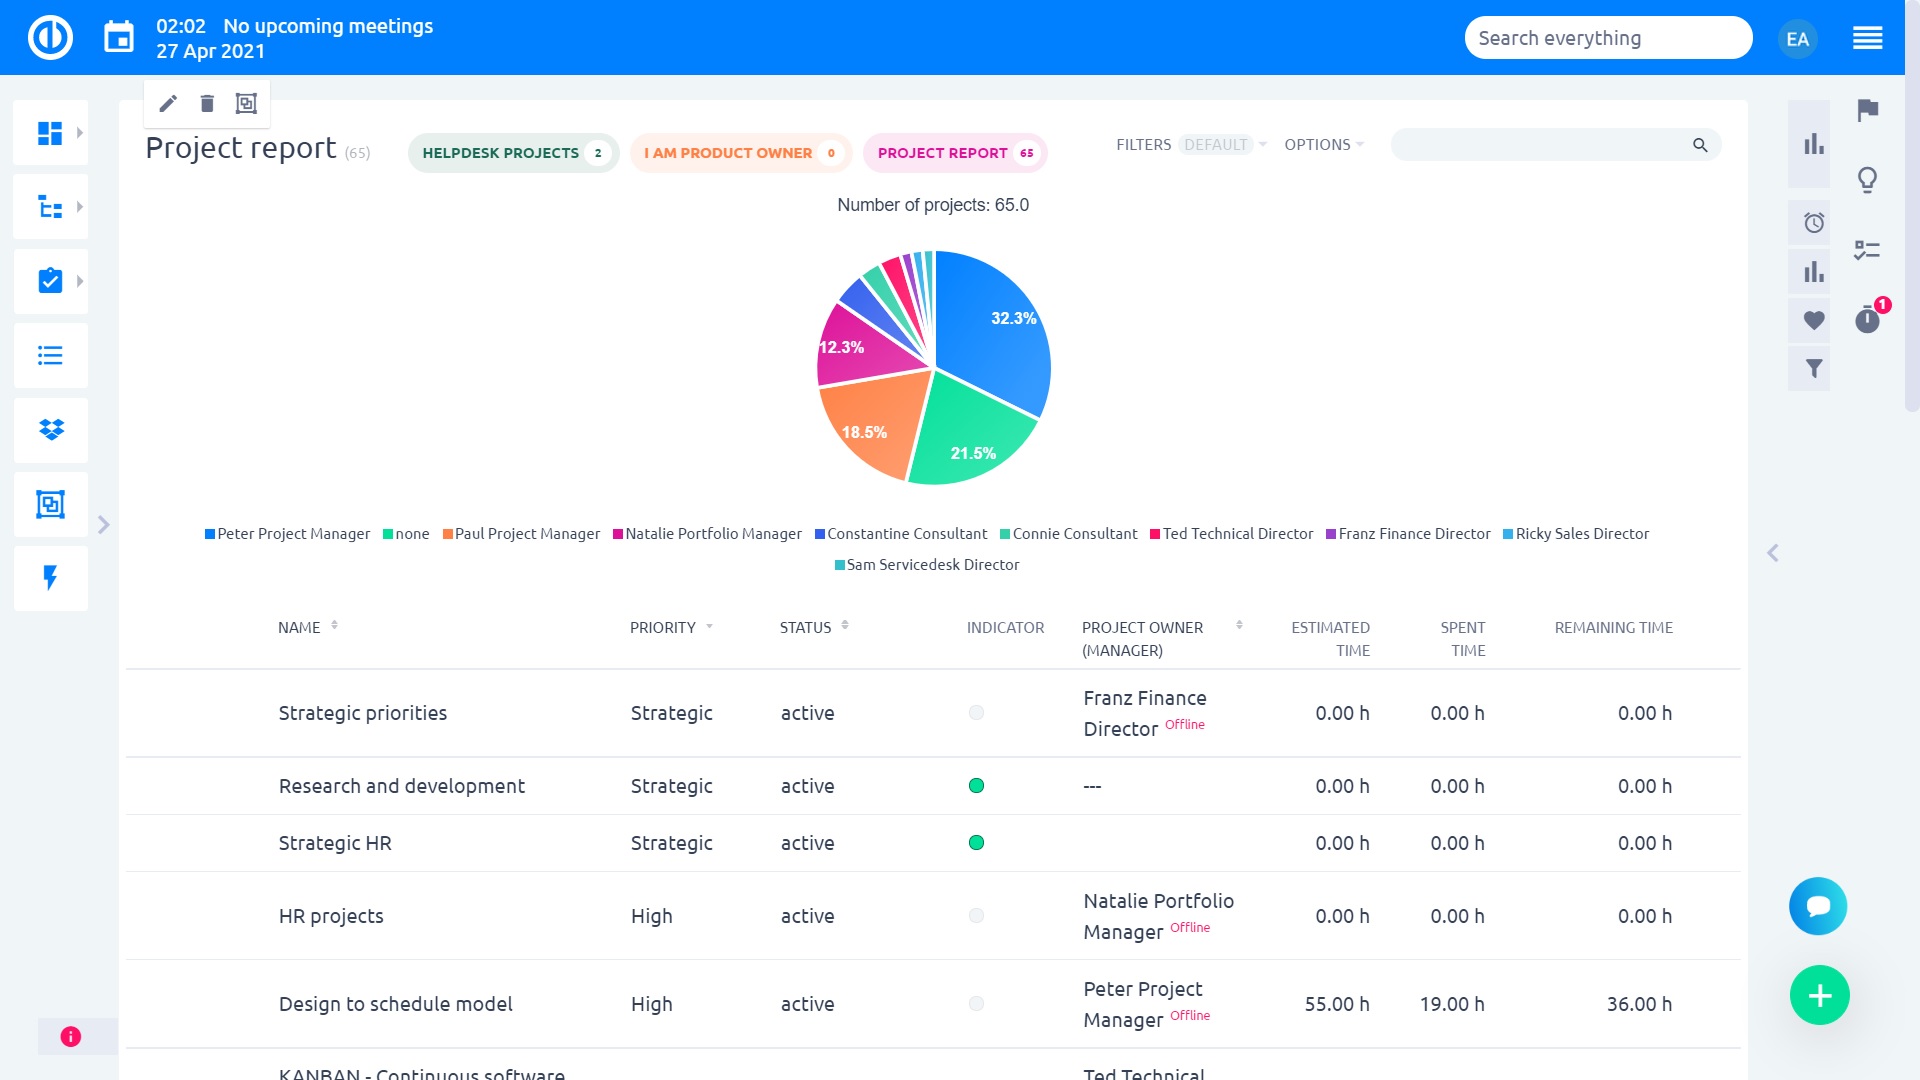 Easy Project - Project Manager Dashboard